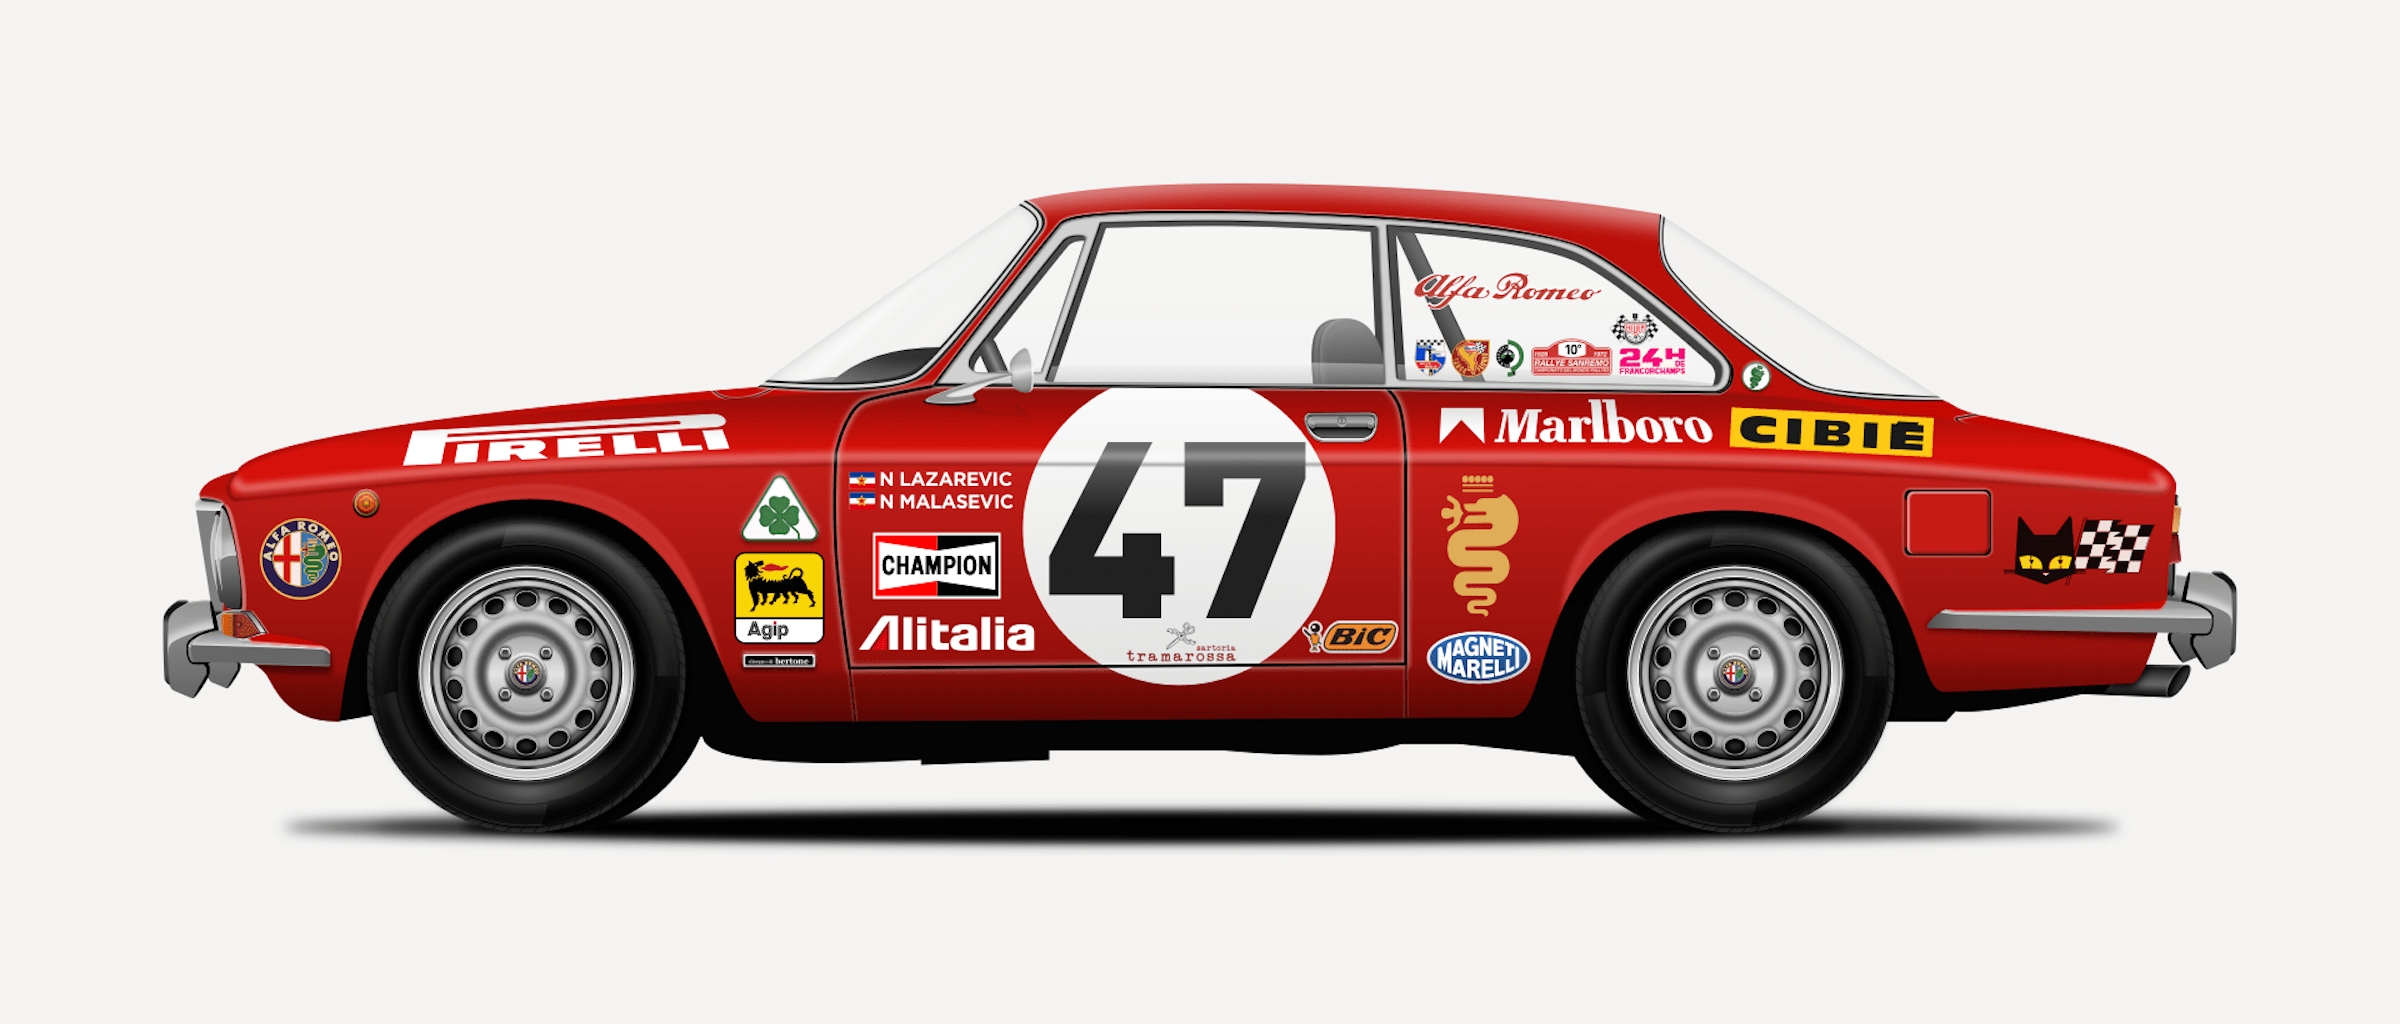 A realistic illustration of an Alfa Romeo car created in Sketch